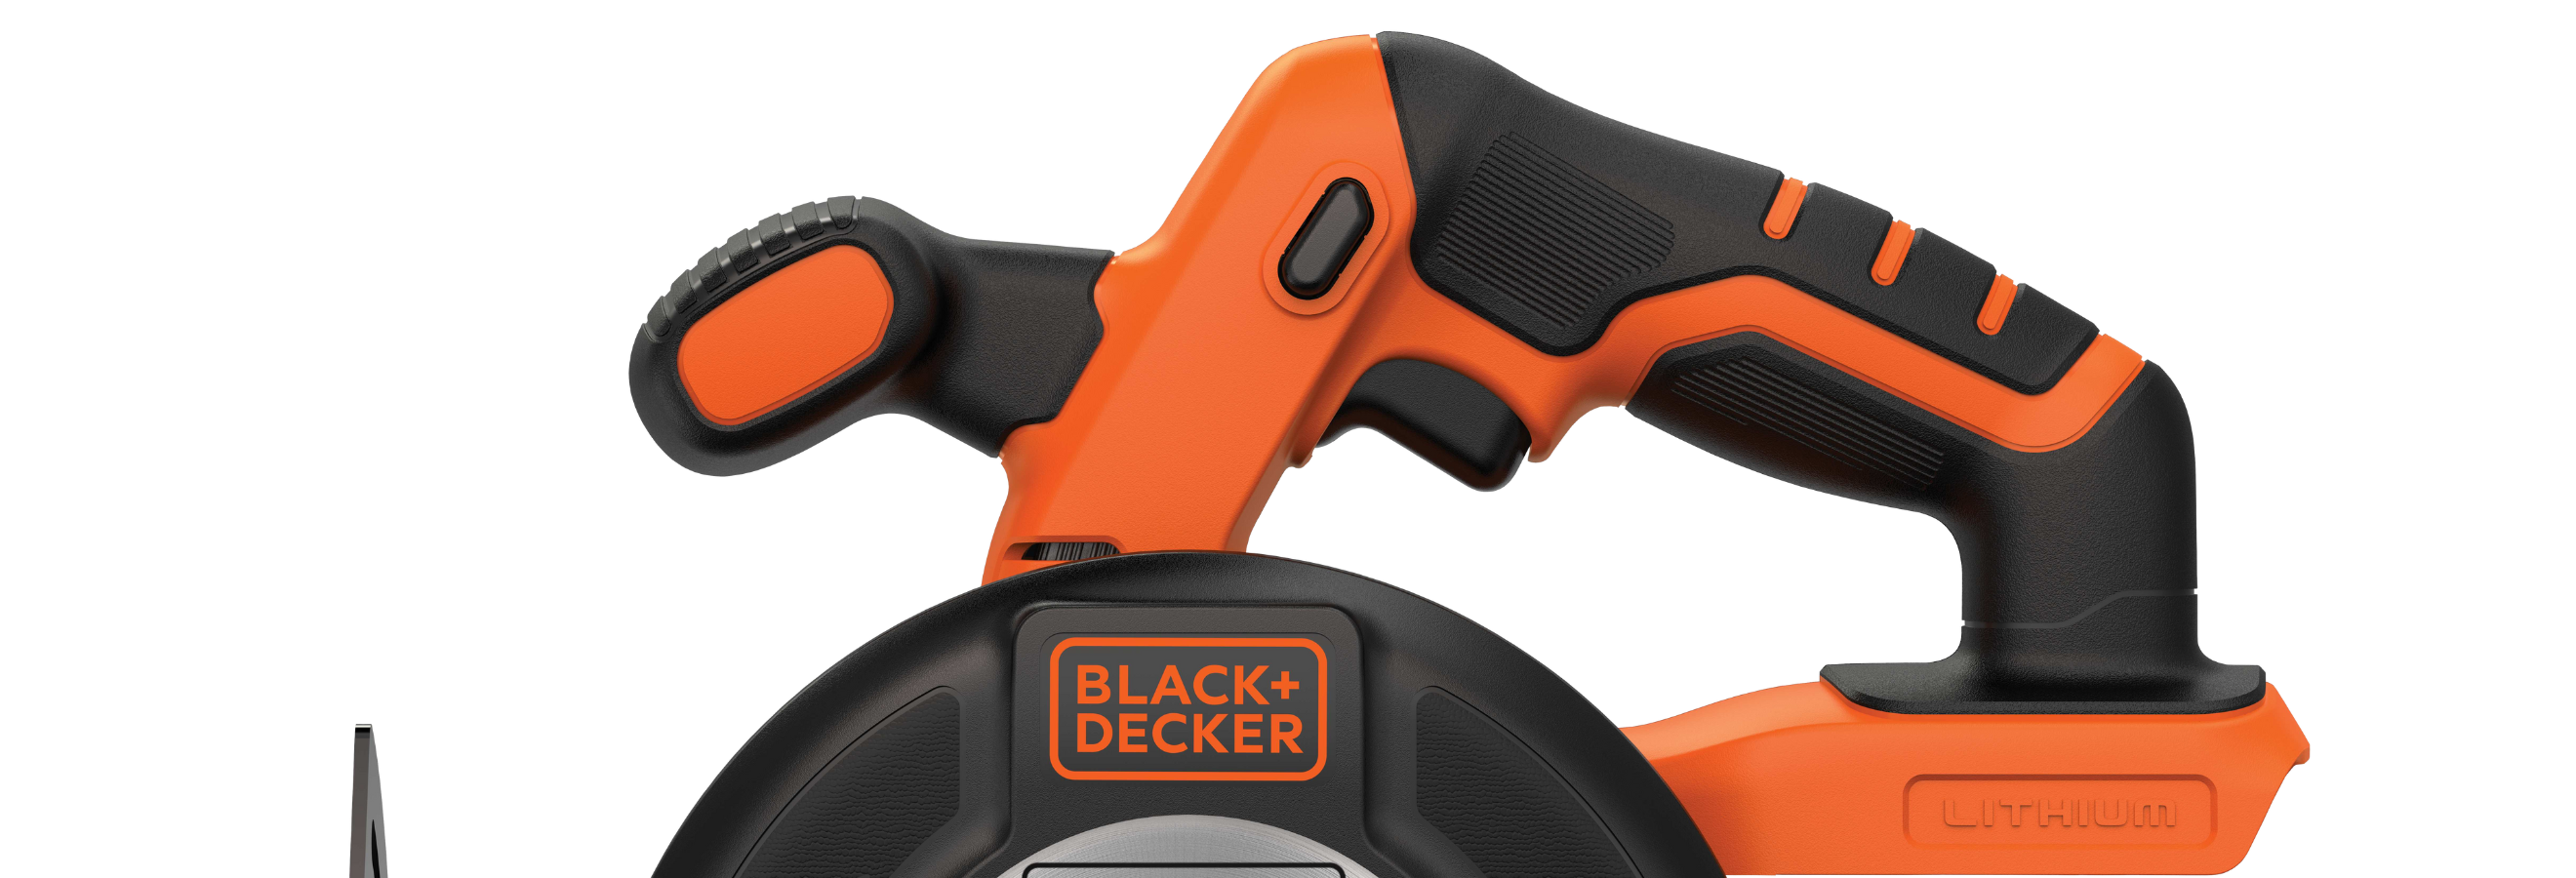 AS-IS BLACK+DECKER 20V MAX POWERCONNECT 5-1/2 in Cordless Circular